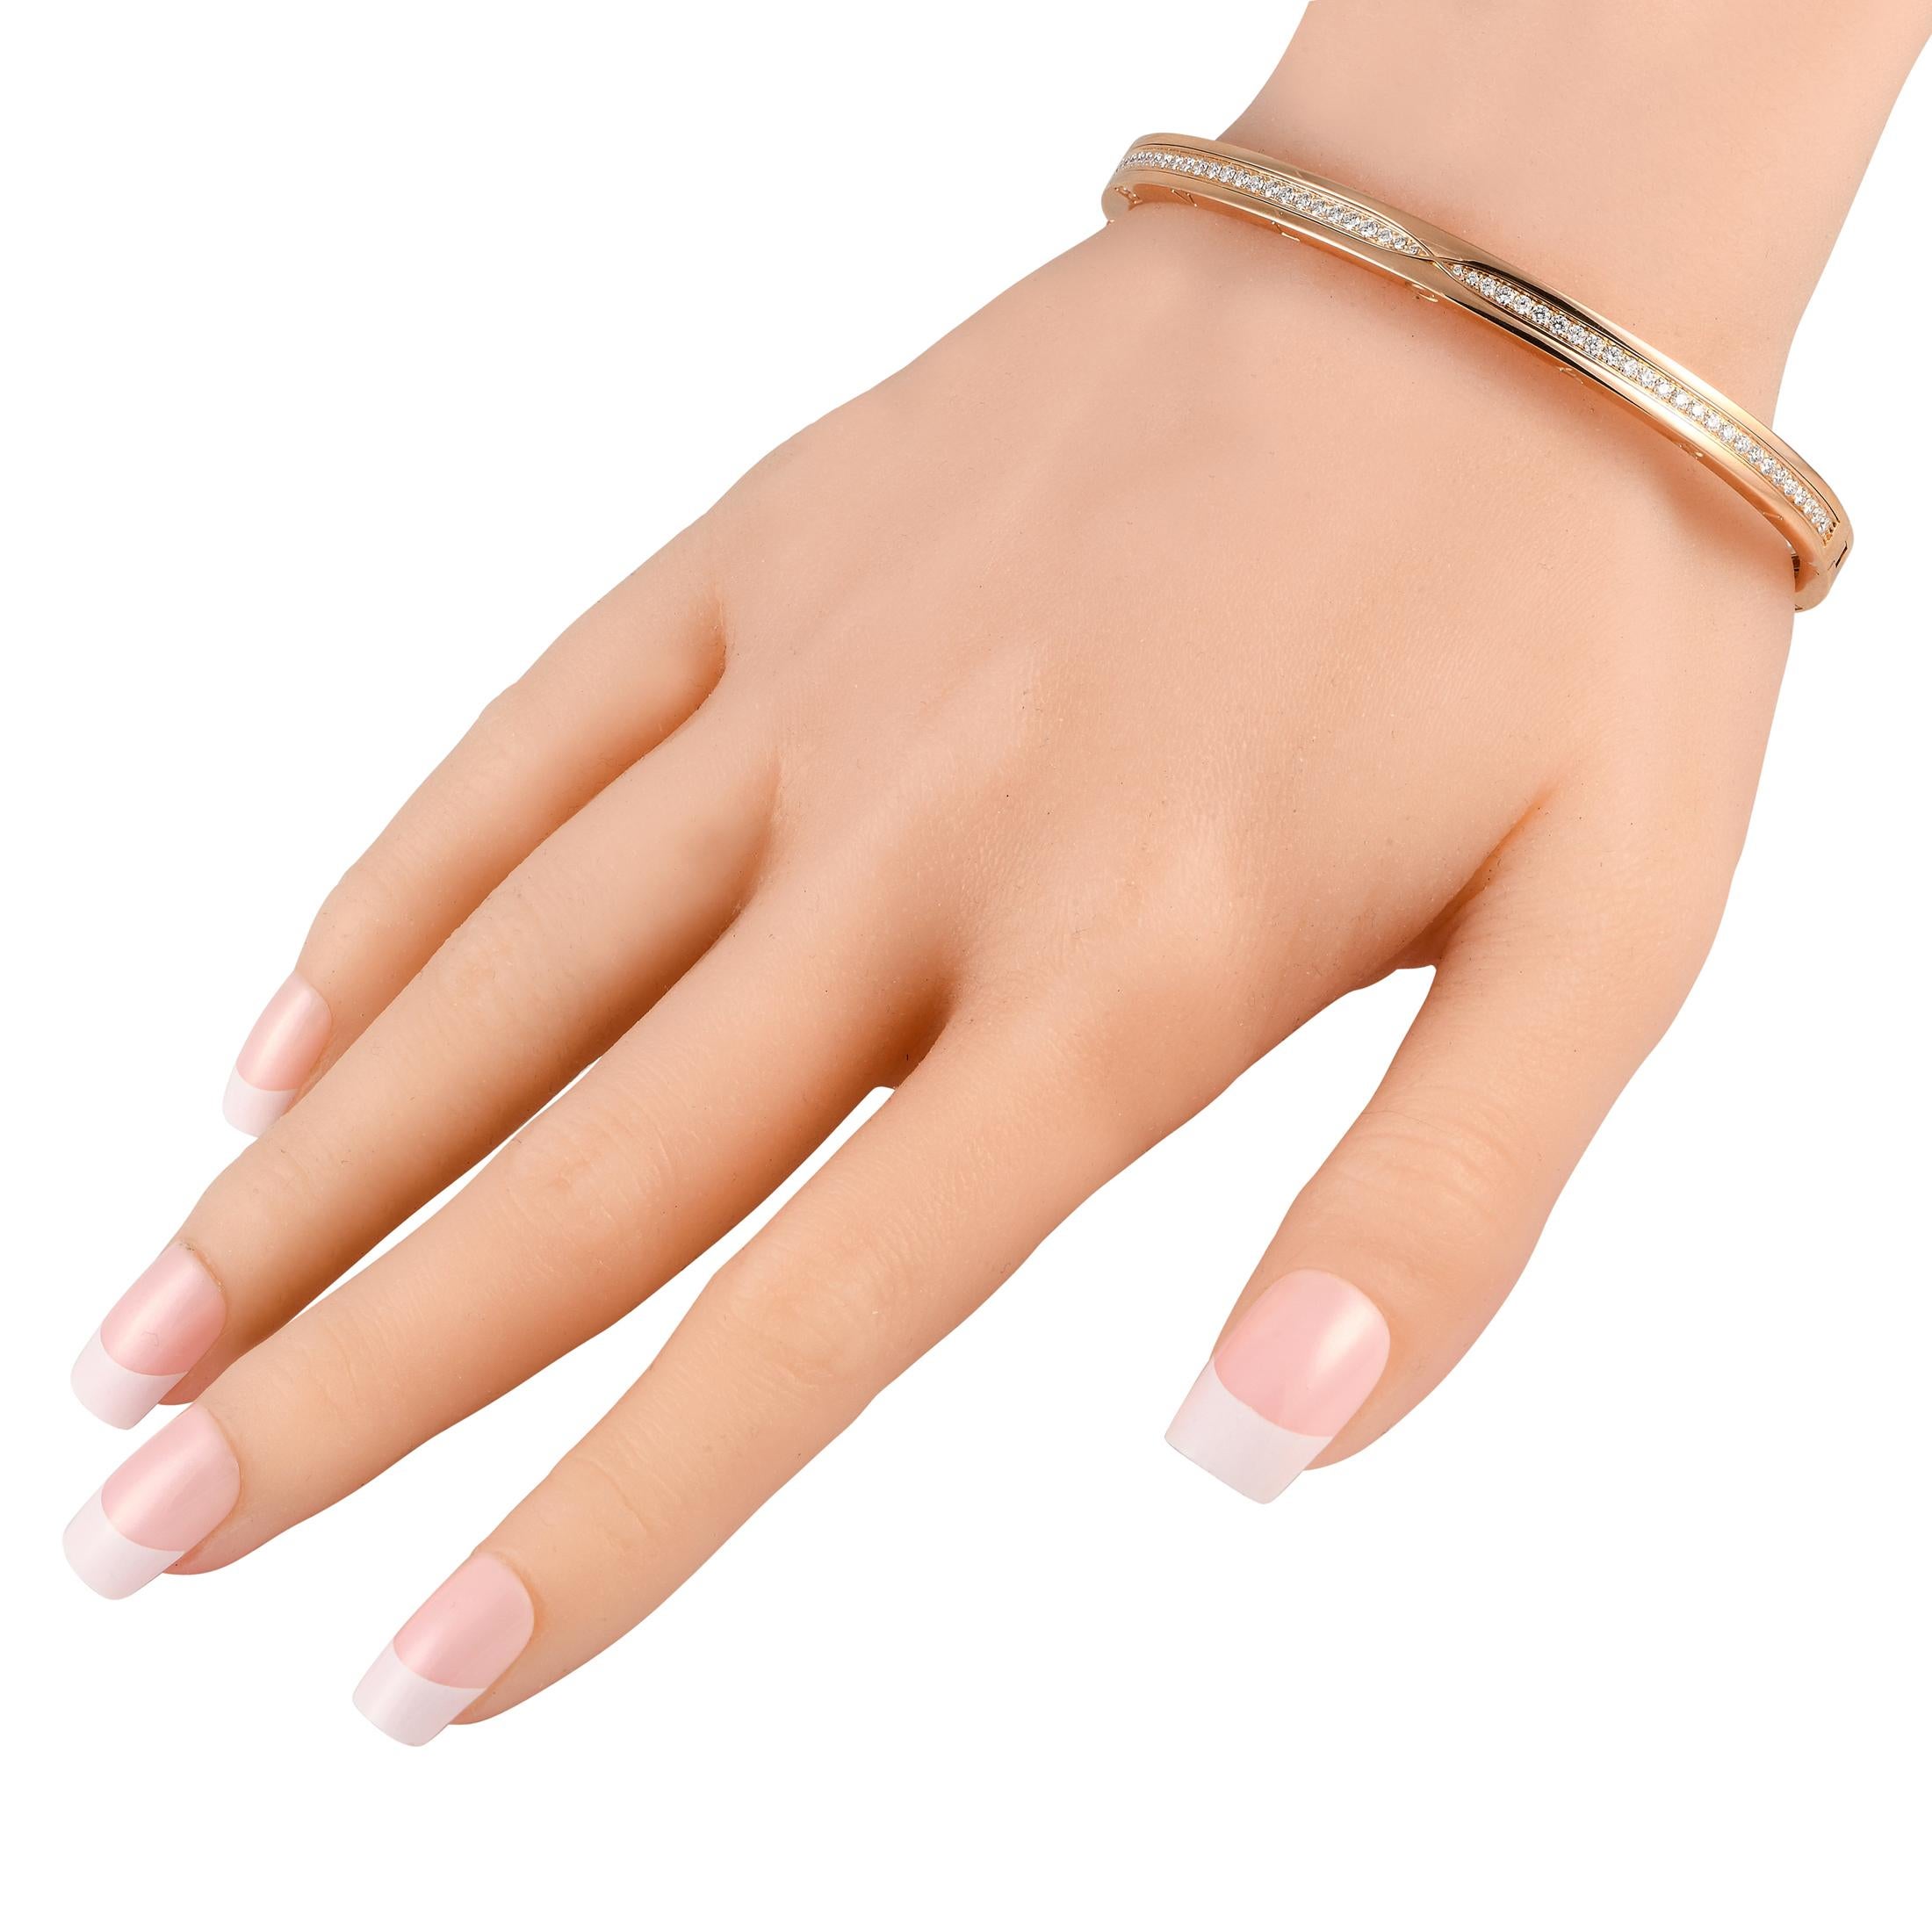 This impeccably crafted Bvlgari B.Zero bangle bracelet is a timeless piece that will never go out of style. The sleek, understated 18K Rose Gold setting comes to life thanks to a series of sparkling Diamonds totaling 1.41 carats and the luxury